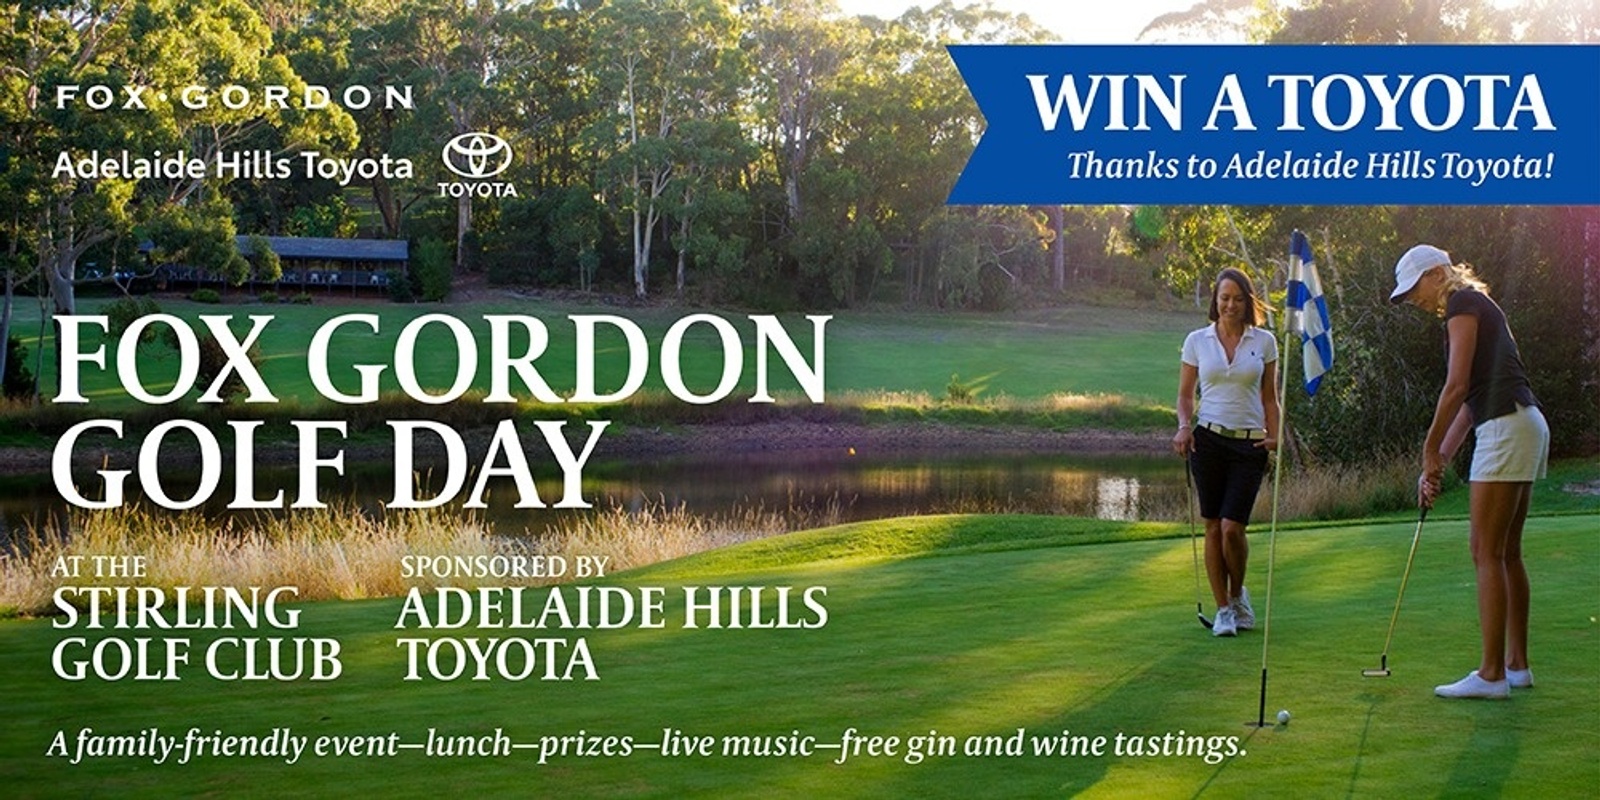 Banner image for Fox Gordon Golf Day at The Stirling Golf Club, sponsored by Adelaide Hills Toyota